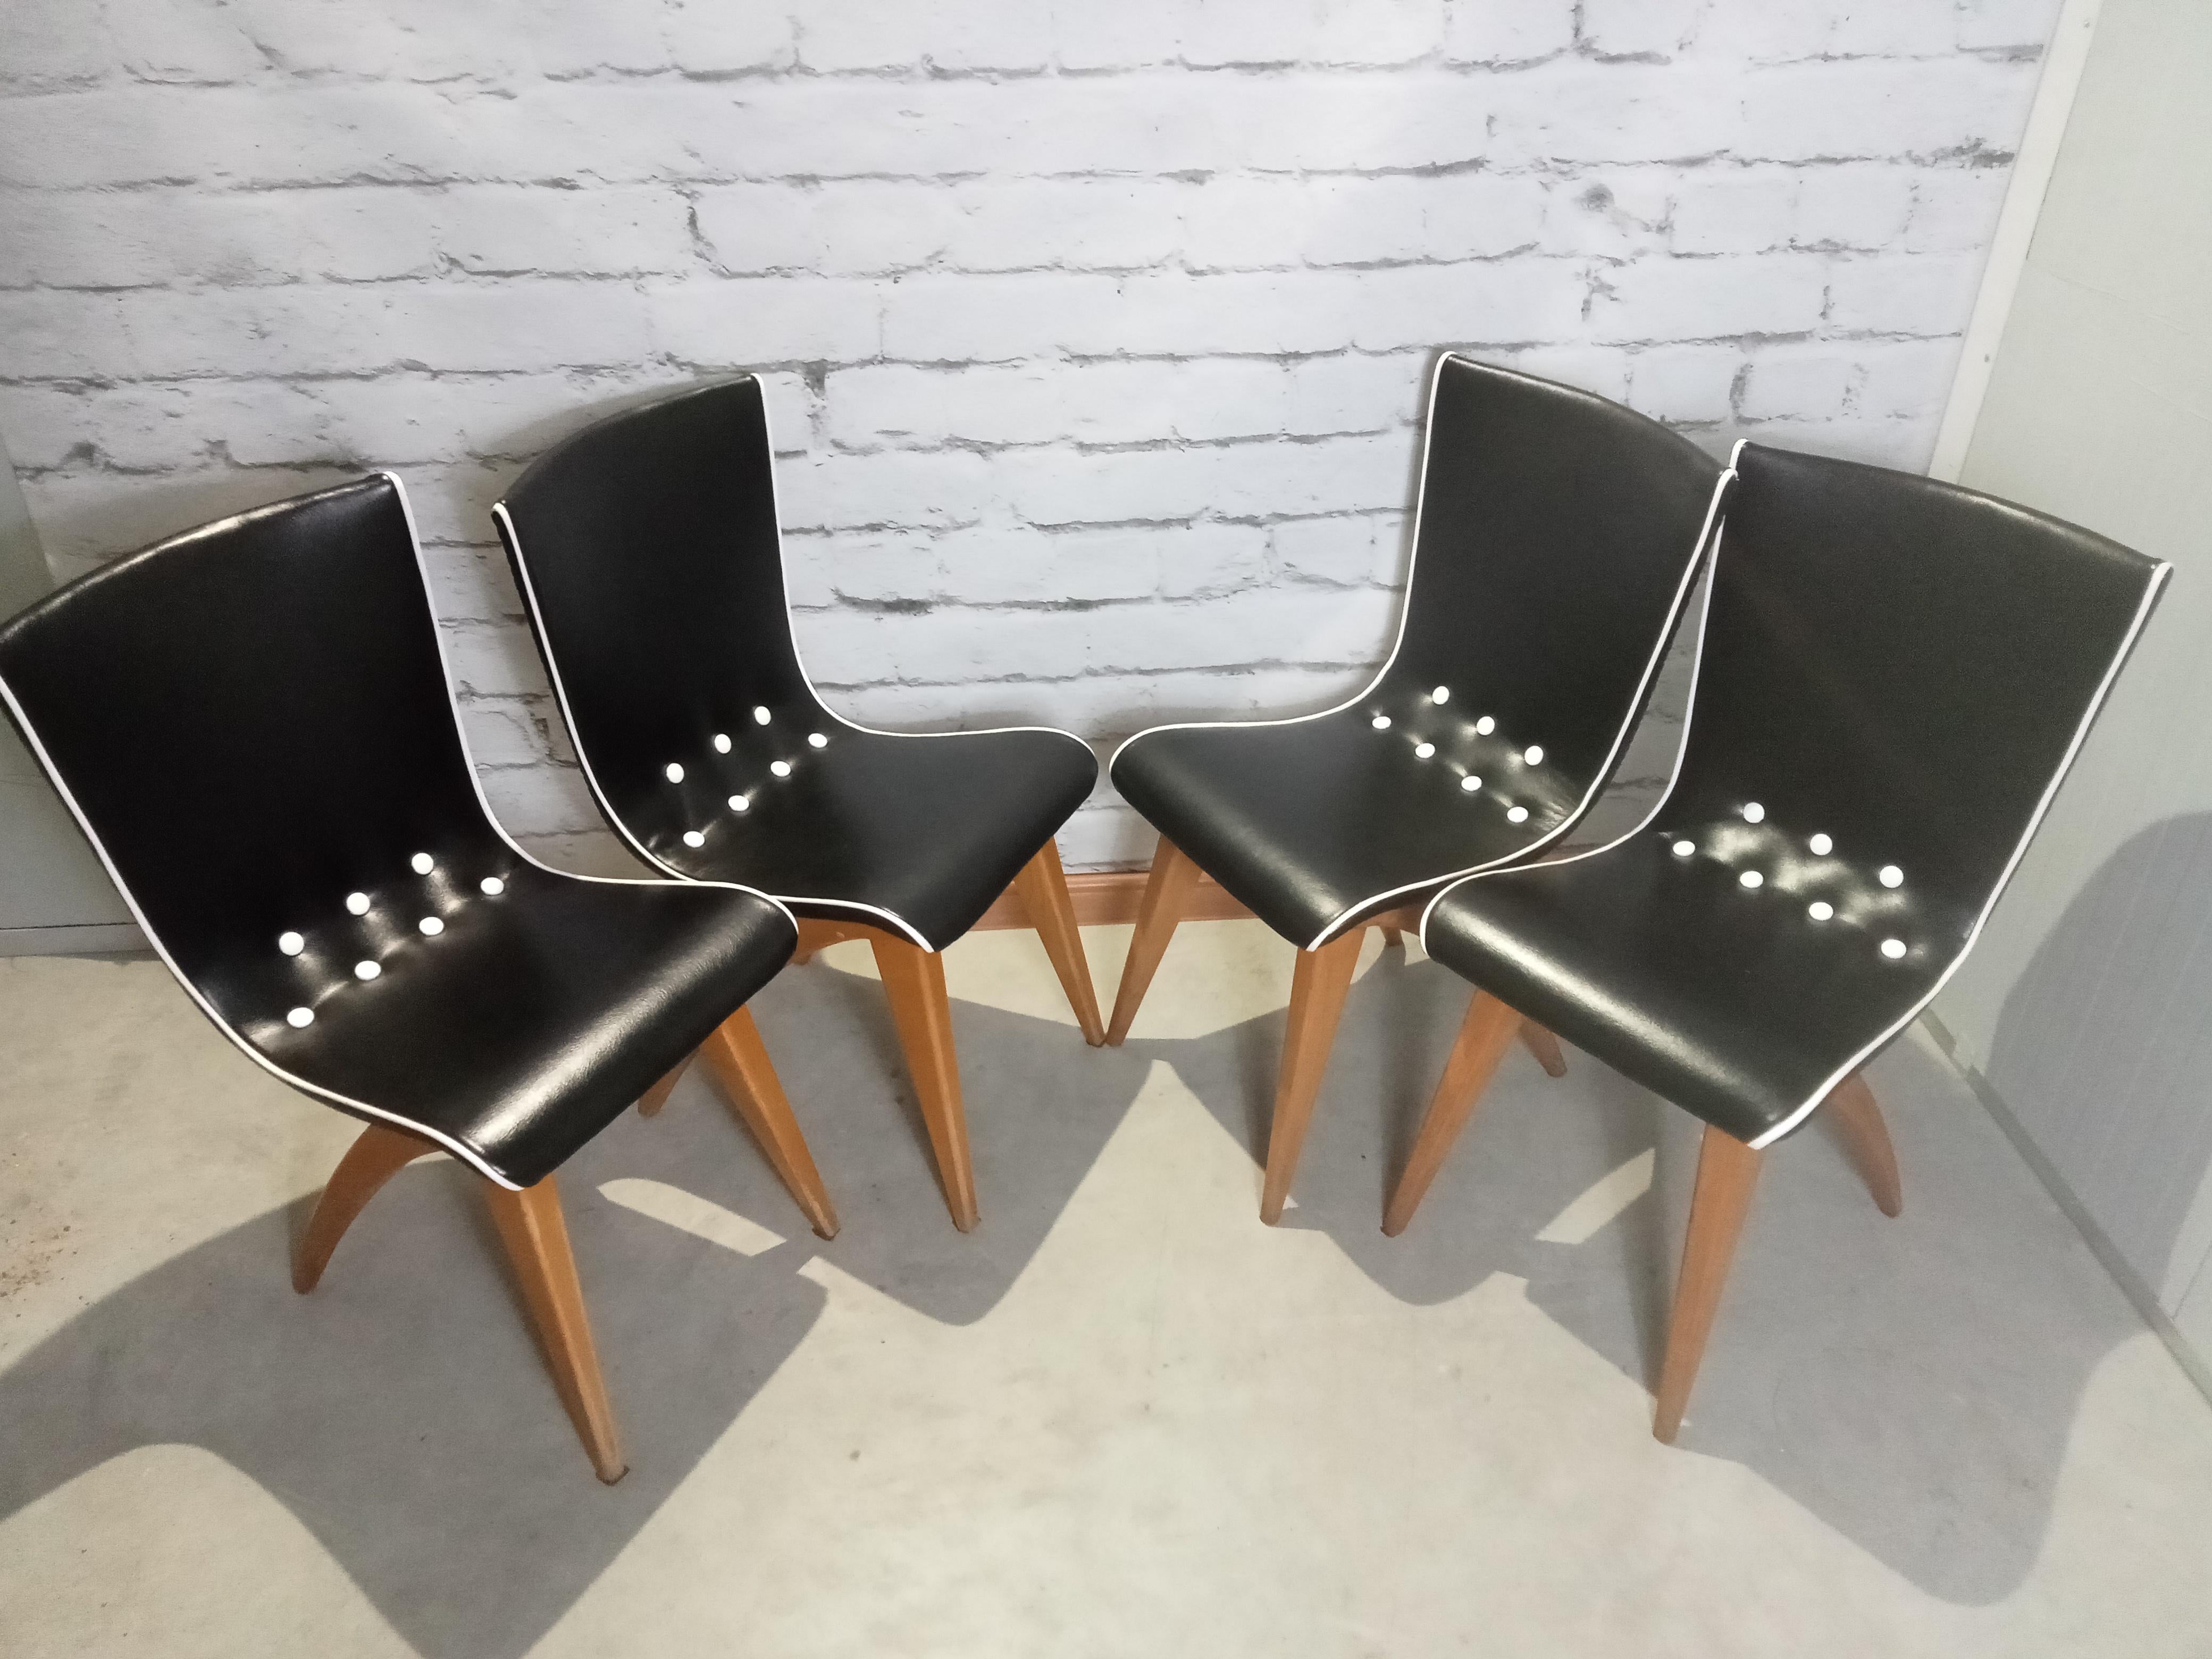 Swing Dining Chairs by G.J. Van Os for Van Os Culemborg, 1950's For Sale 1